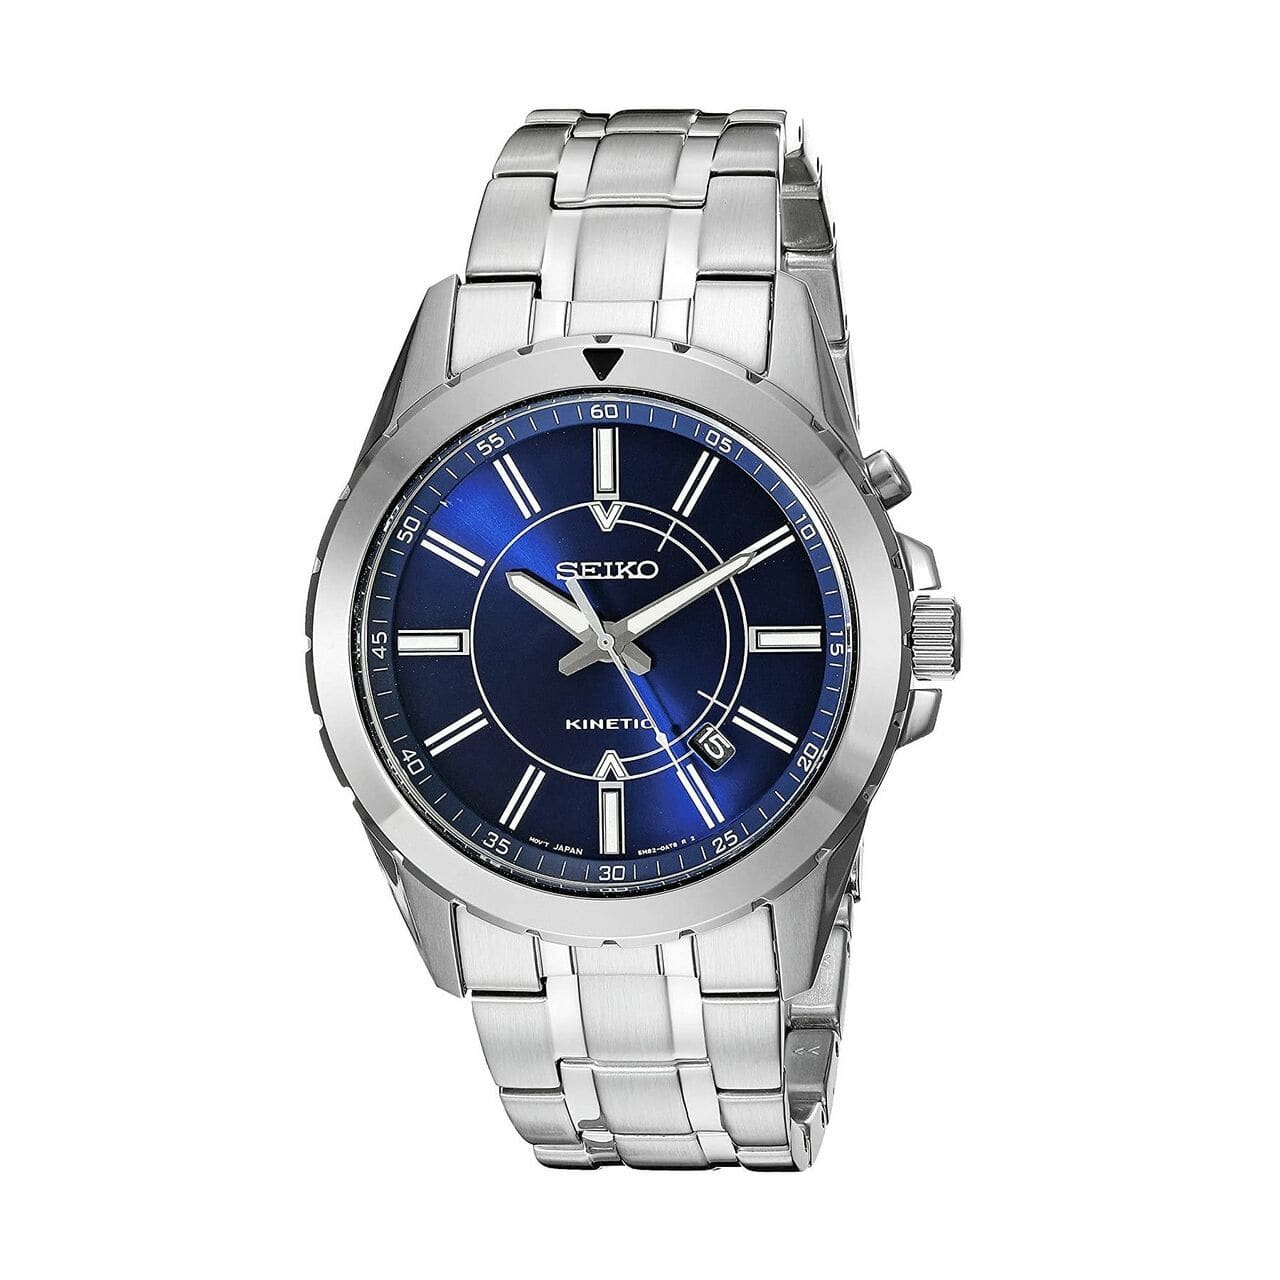 Seiko SKA703 Recraft Silver Stainless Steel Blue Dial Men's Kinetic Watch 029665182203